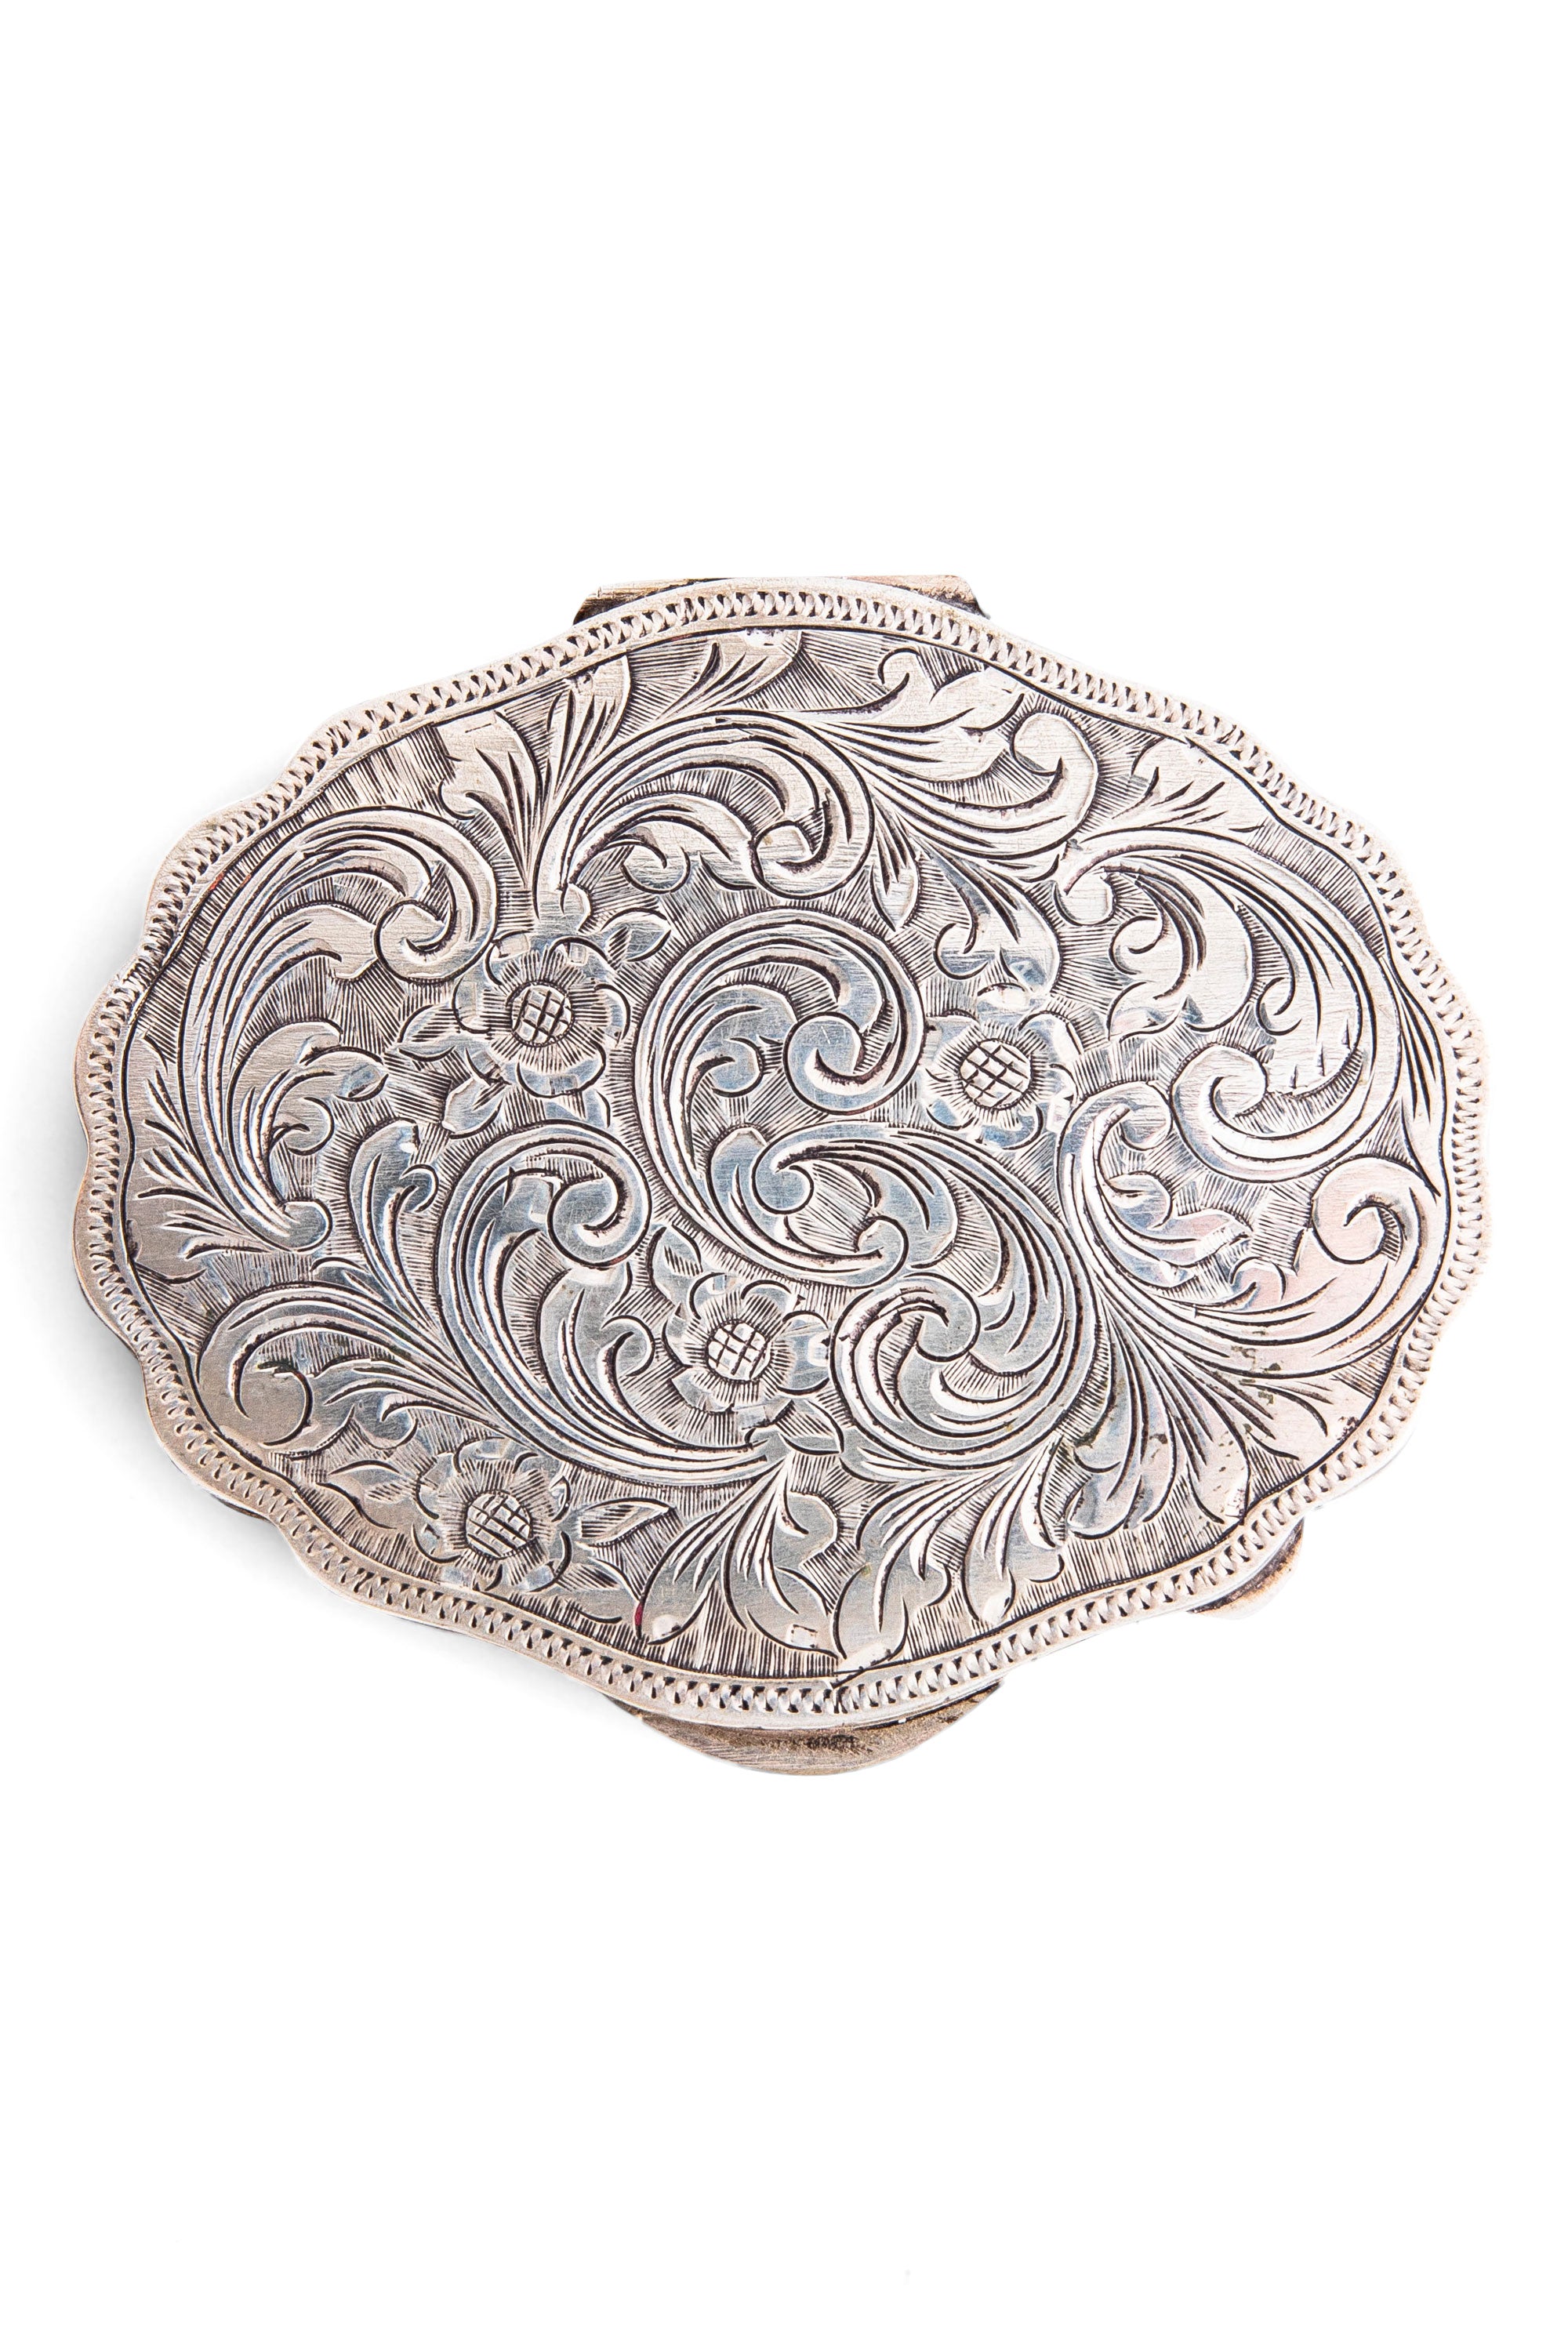 Miscellaneous, Sterling Silver, Compact, Floral Scroll Engraving